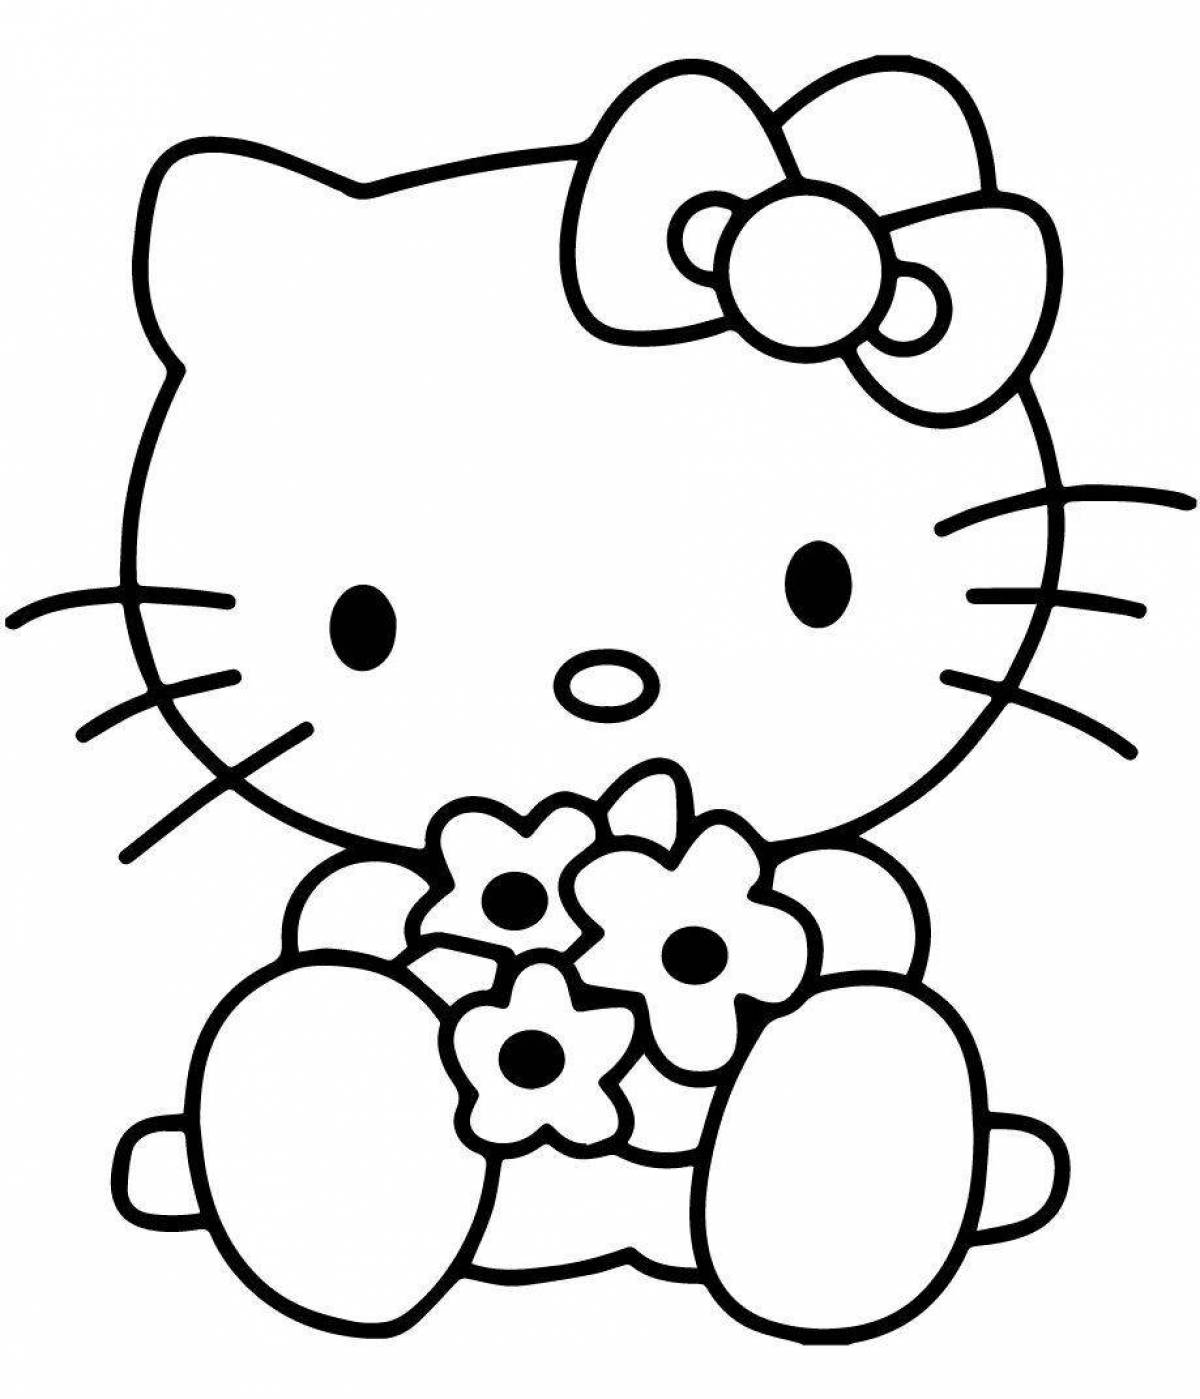 Cute aster kitty coloring page